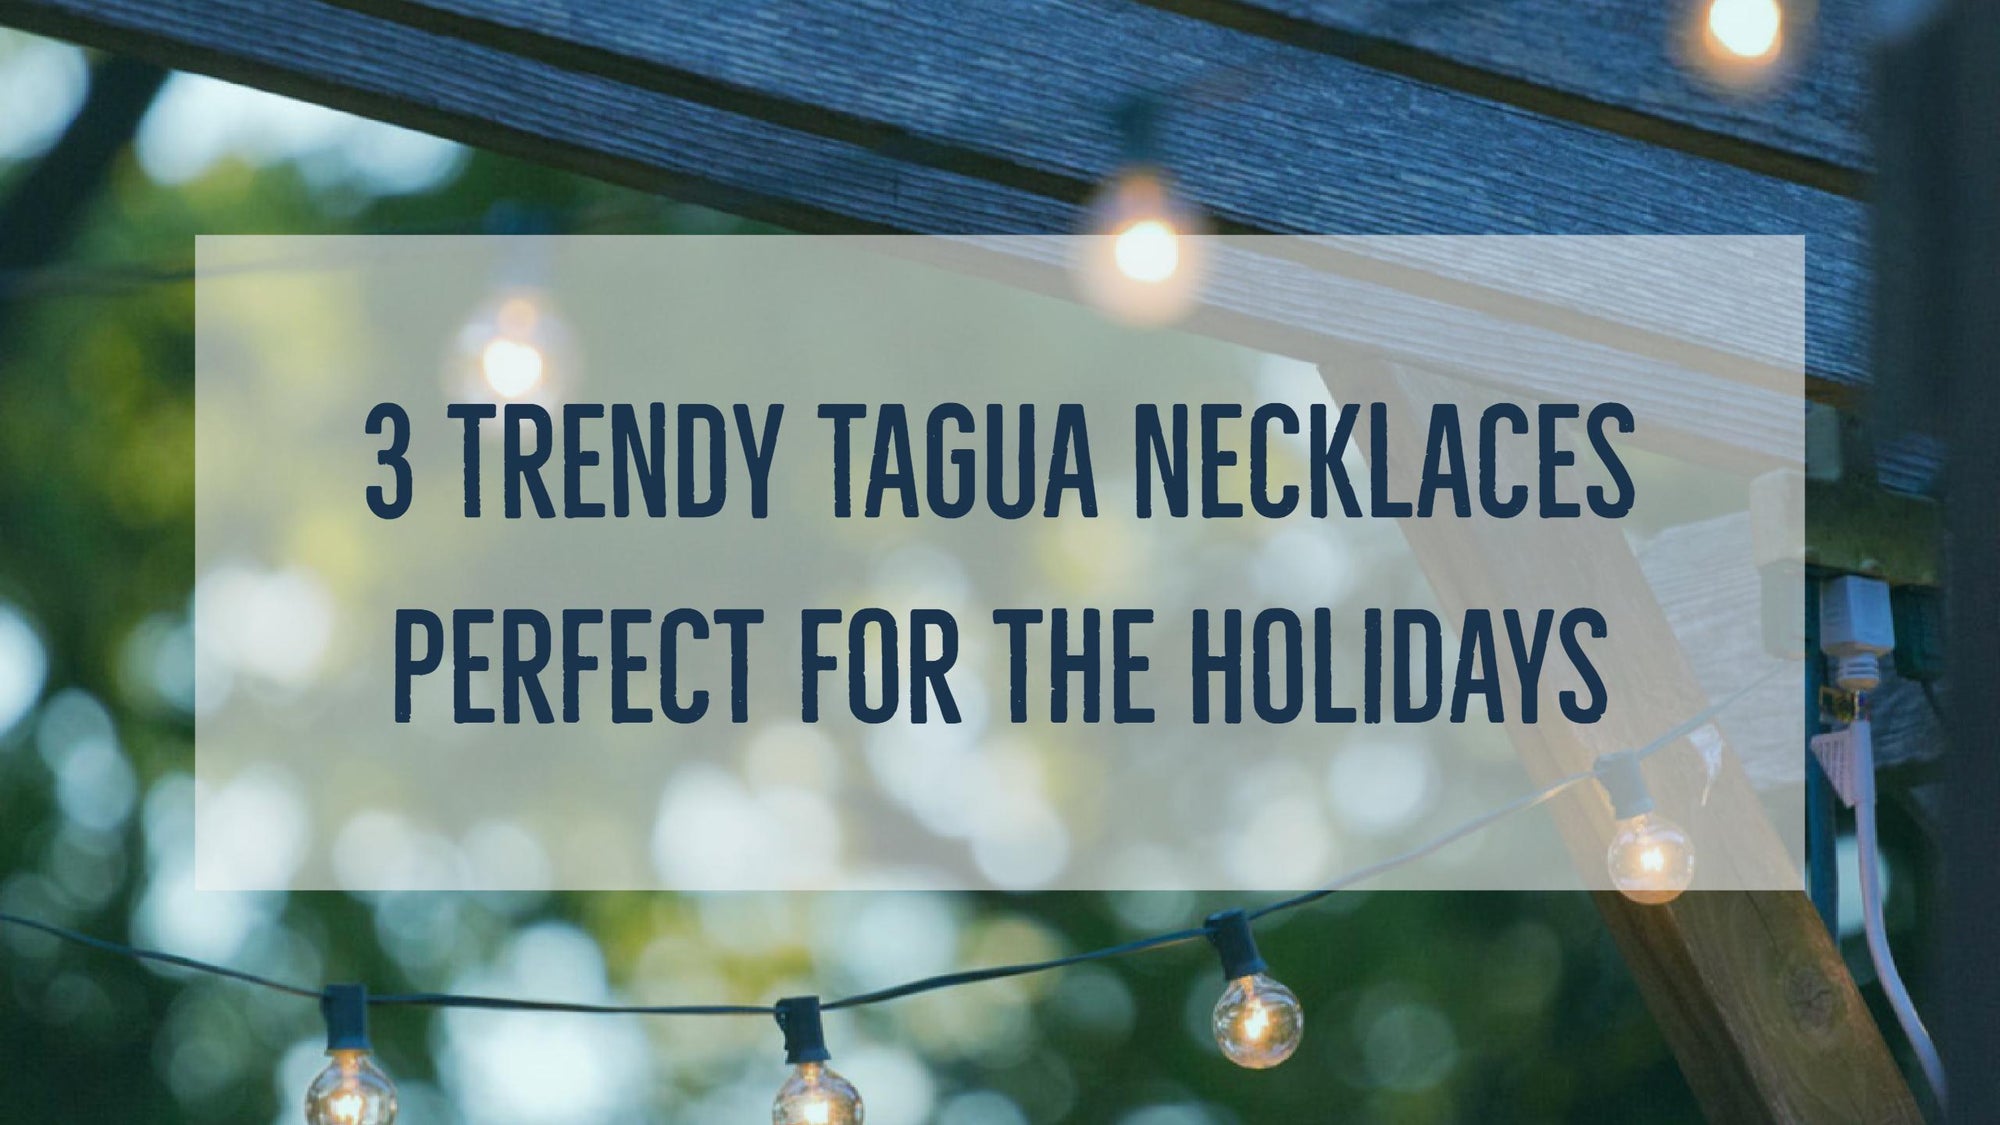 3 Trendy Tagua Necklaces Perfect for Holiday Fashion